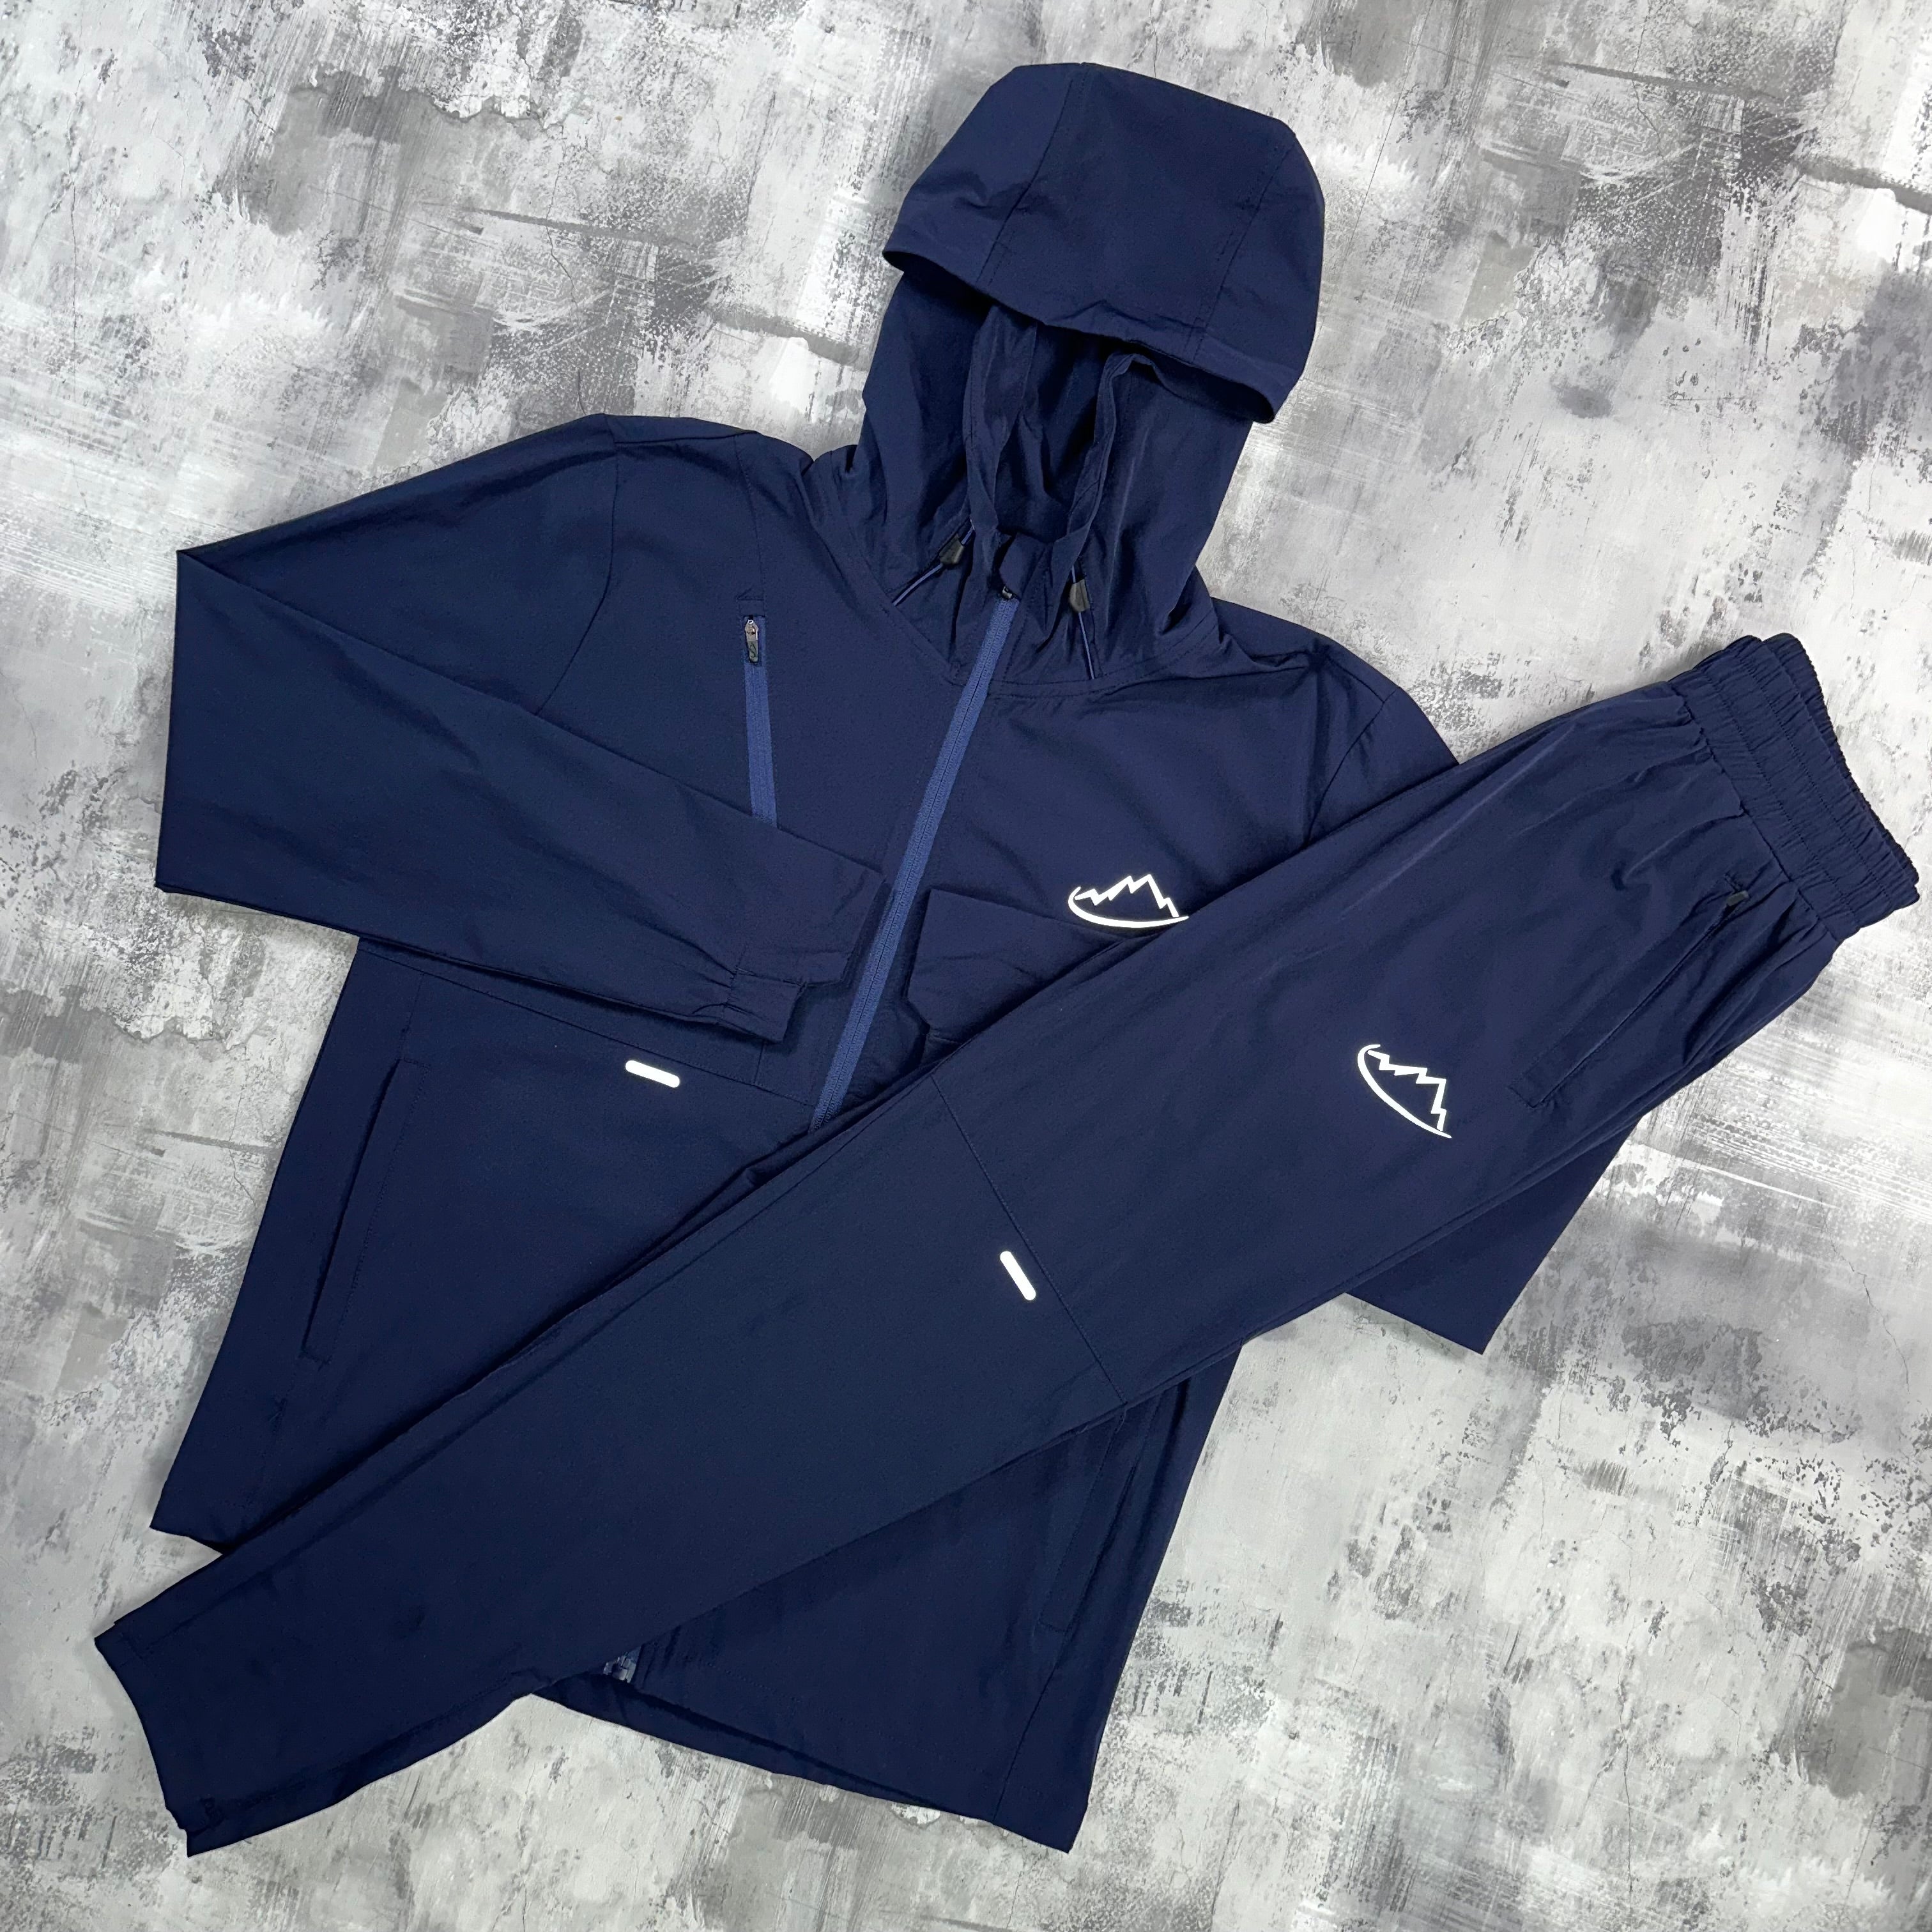 Adapt To tracer set Navy - Jacket & Trousers